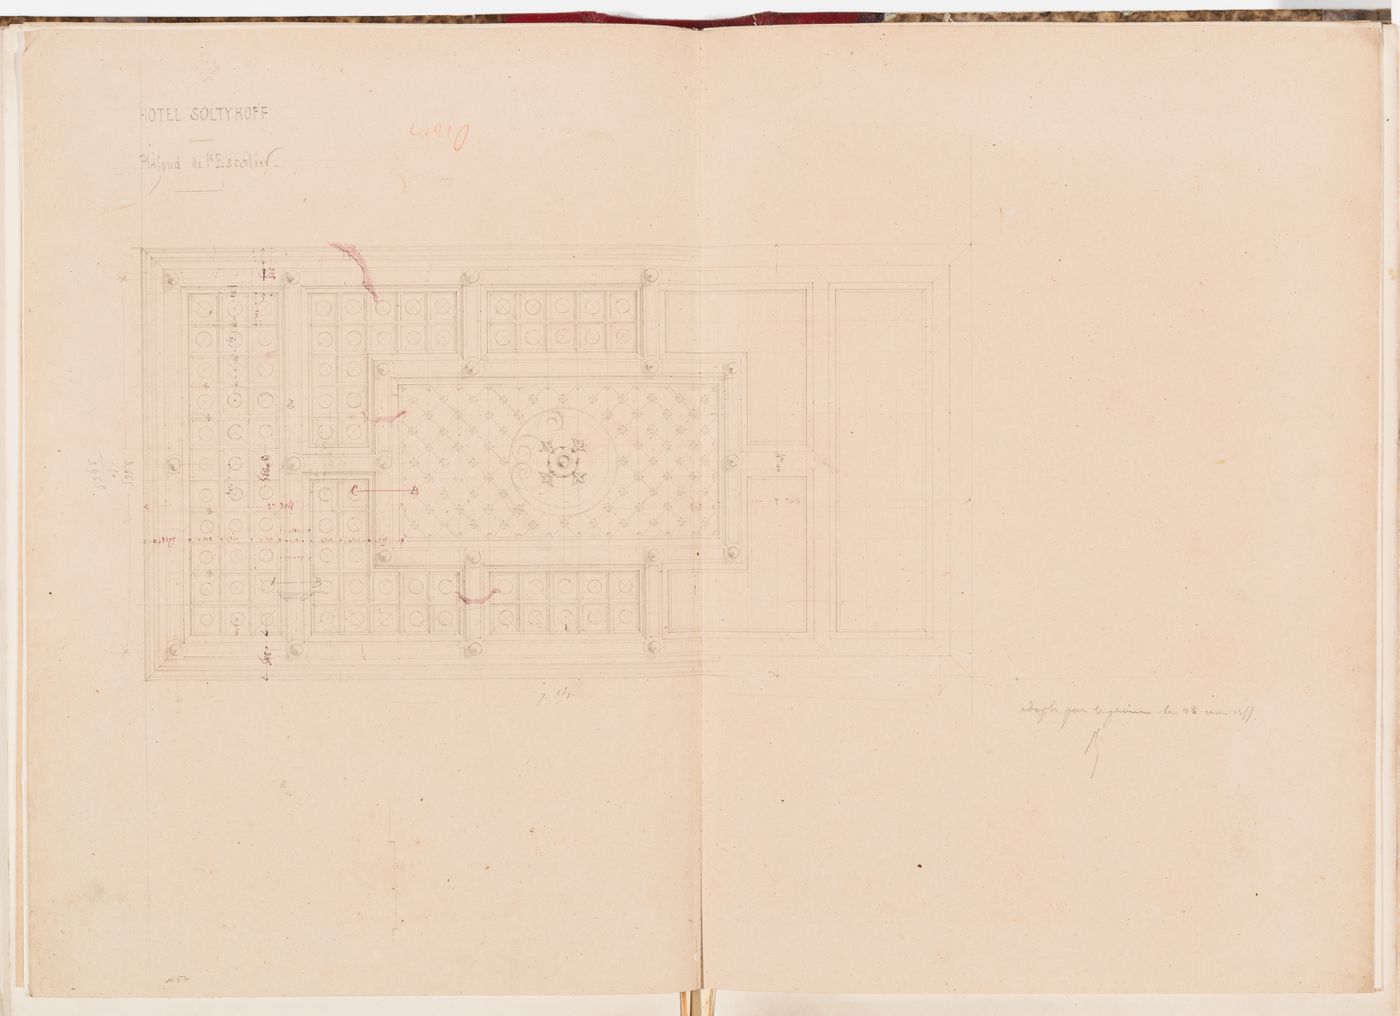 Reflected ceiling plan with moulding profiles for the grand staircase, Hôtel Soltykoff